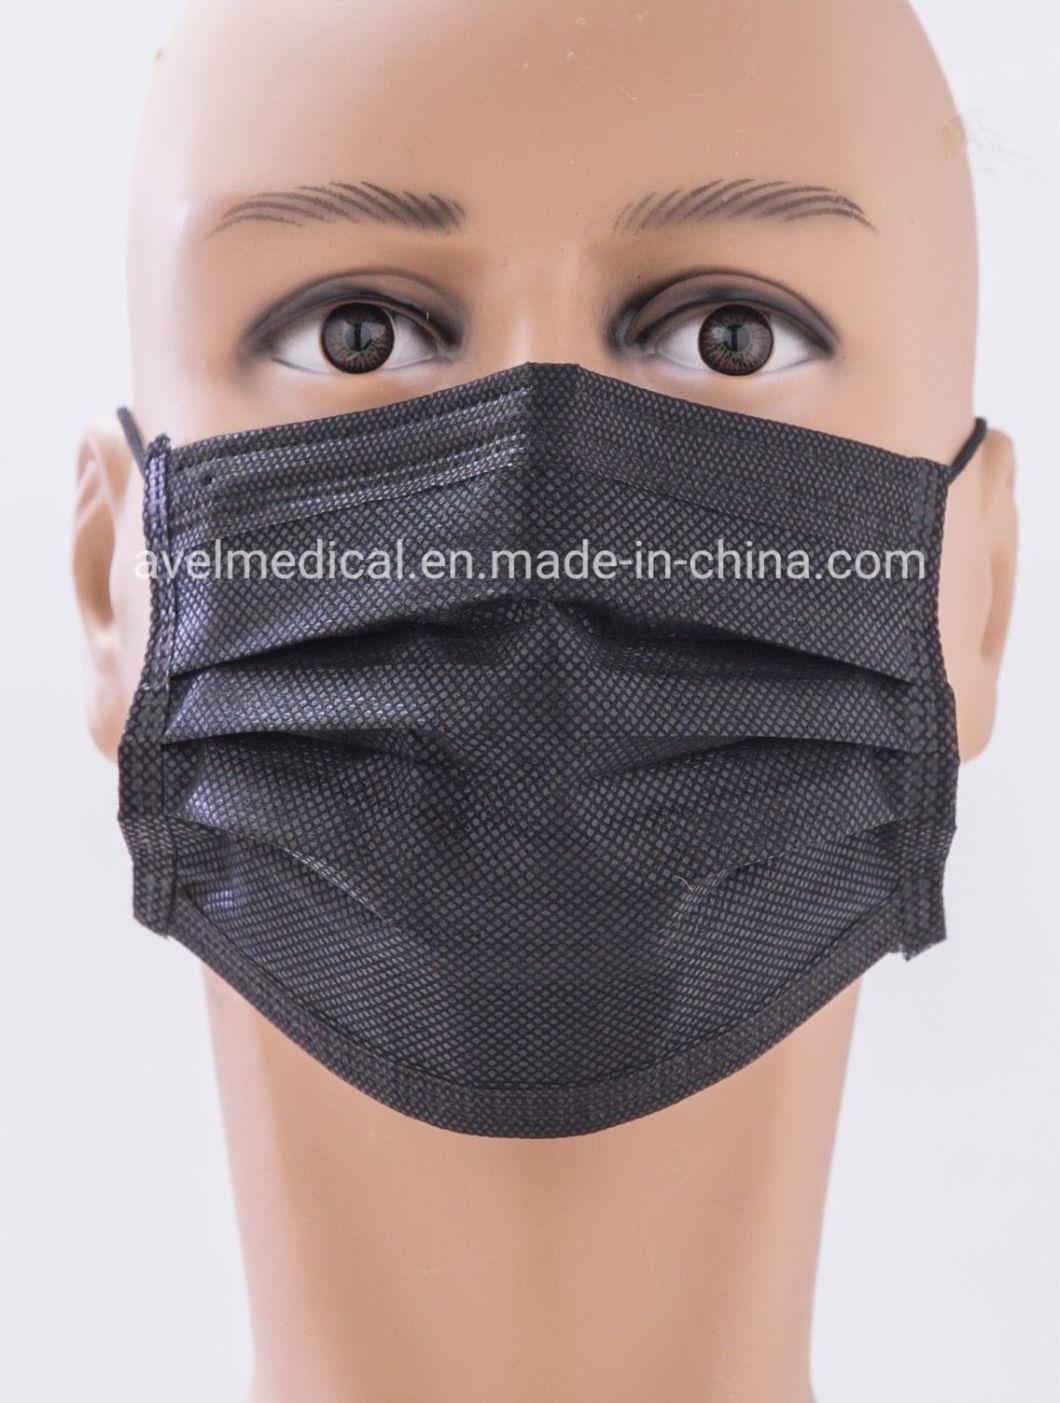 Protective Surgical Non-Woven Disposable Medical Face Mask with 3 Fly